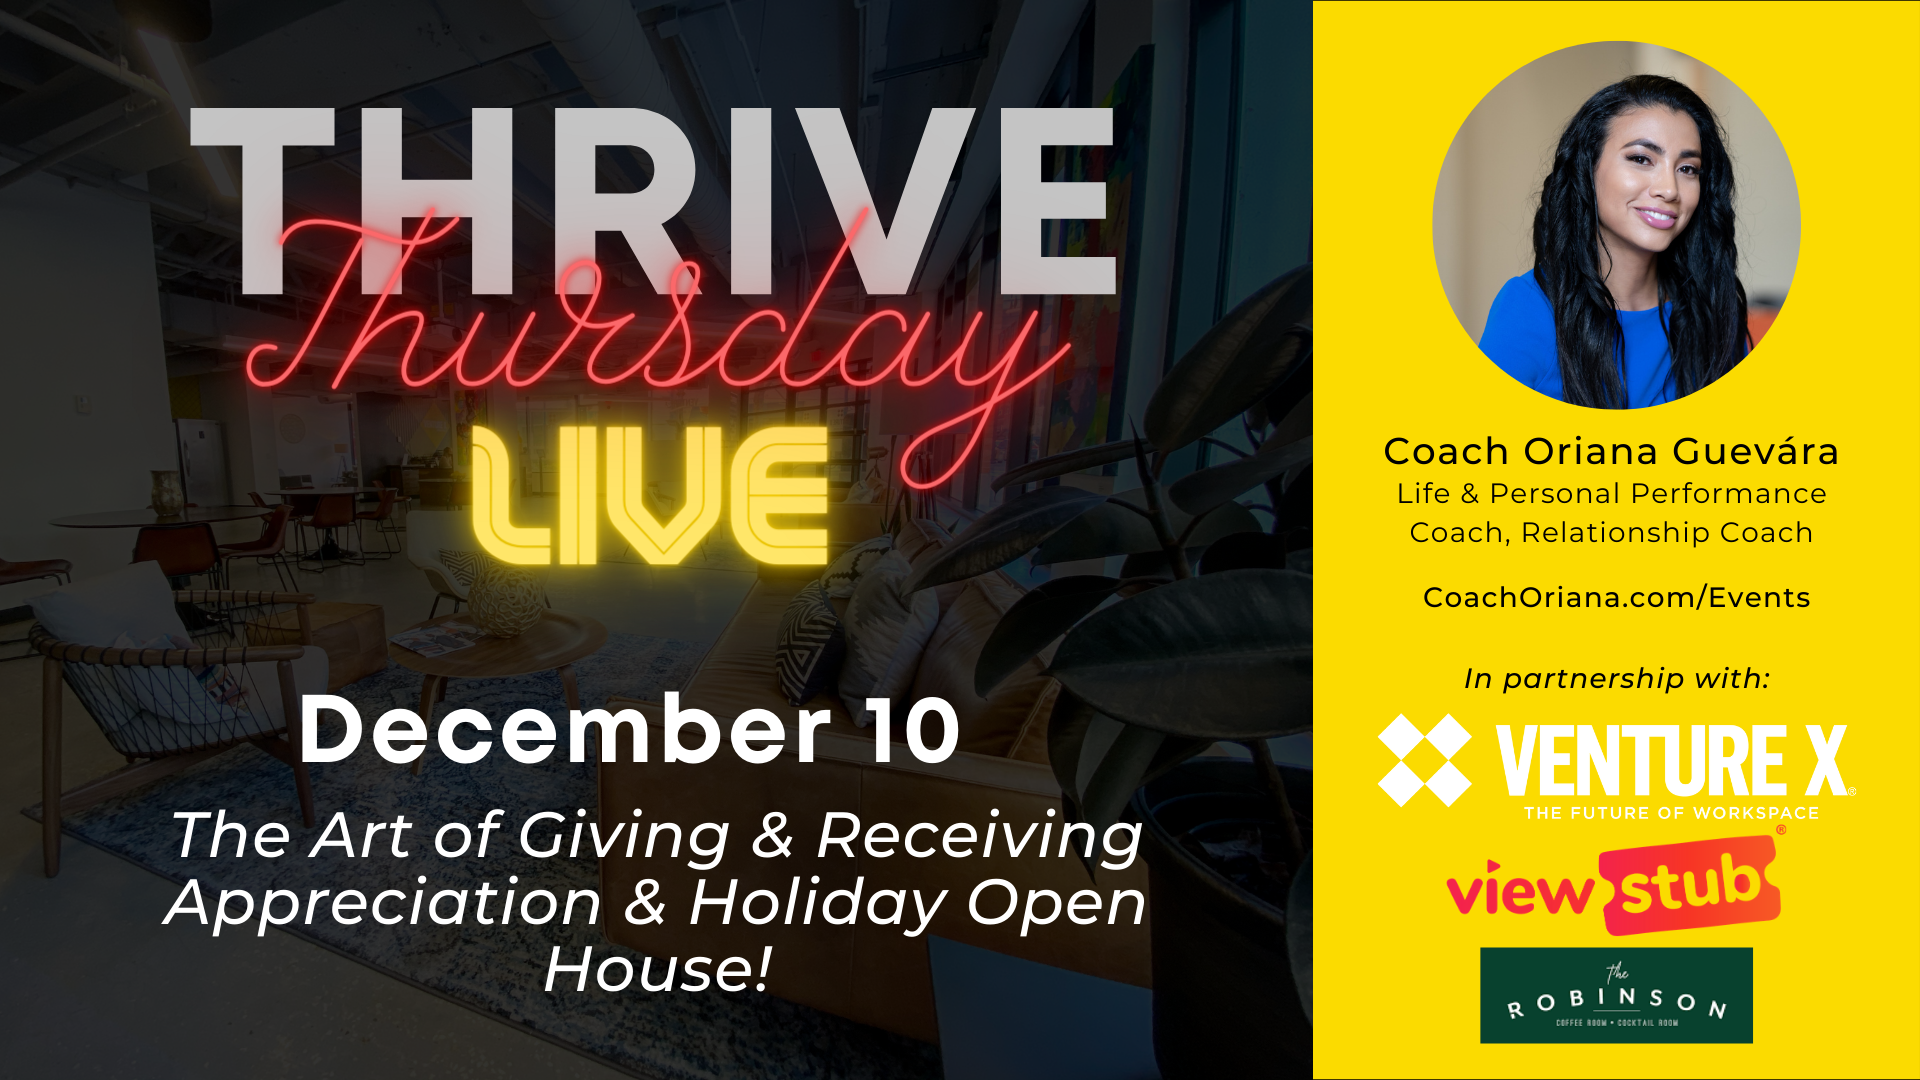 Photo for Thrive Thursday LIVE & Holiday Open House @ Venture X Downtown Orlando on ViewStub